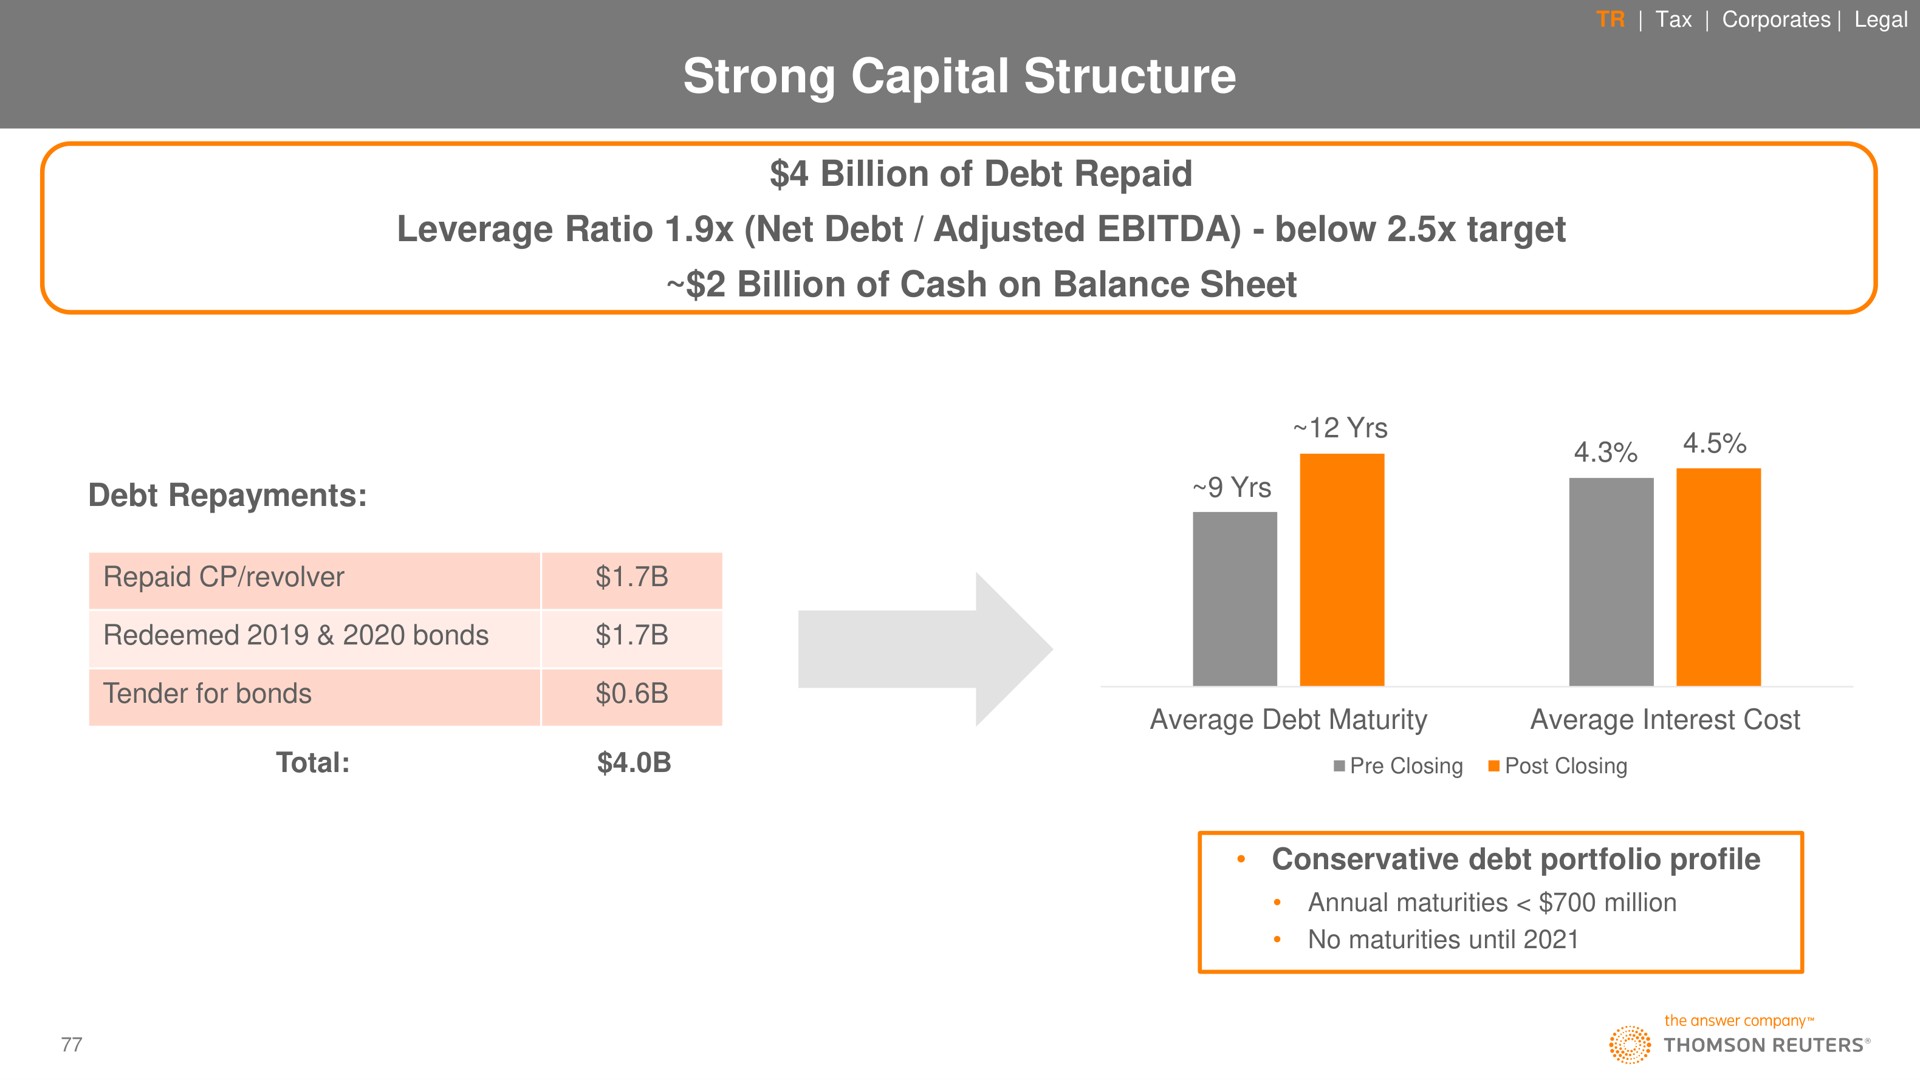 strong capital structure | Thomson Reuters